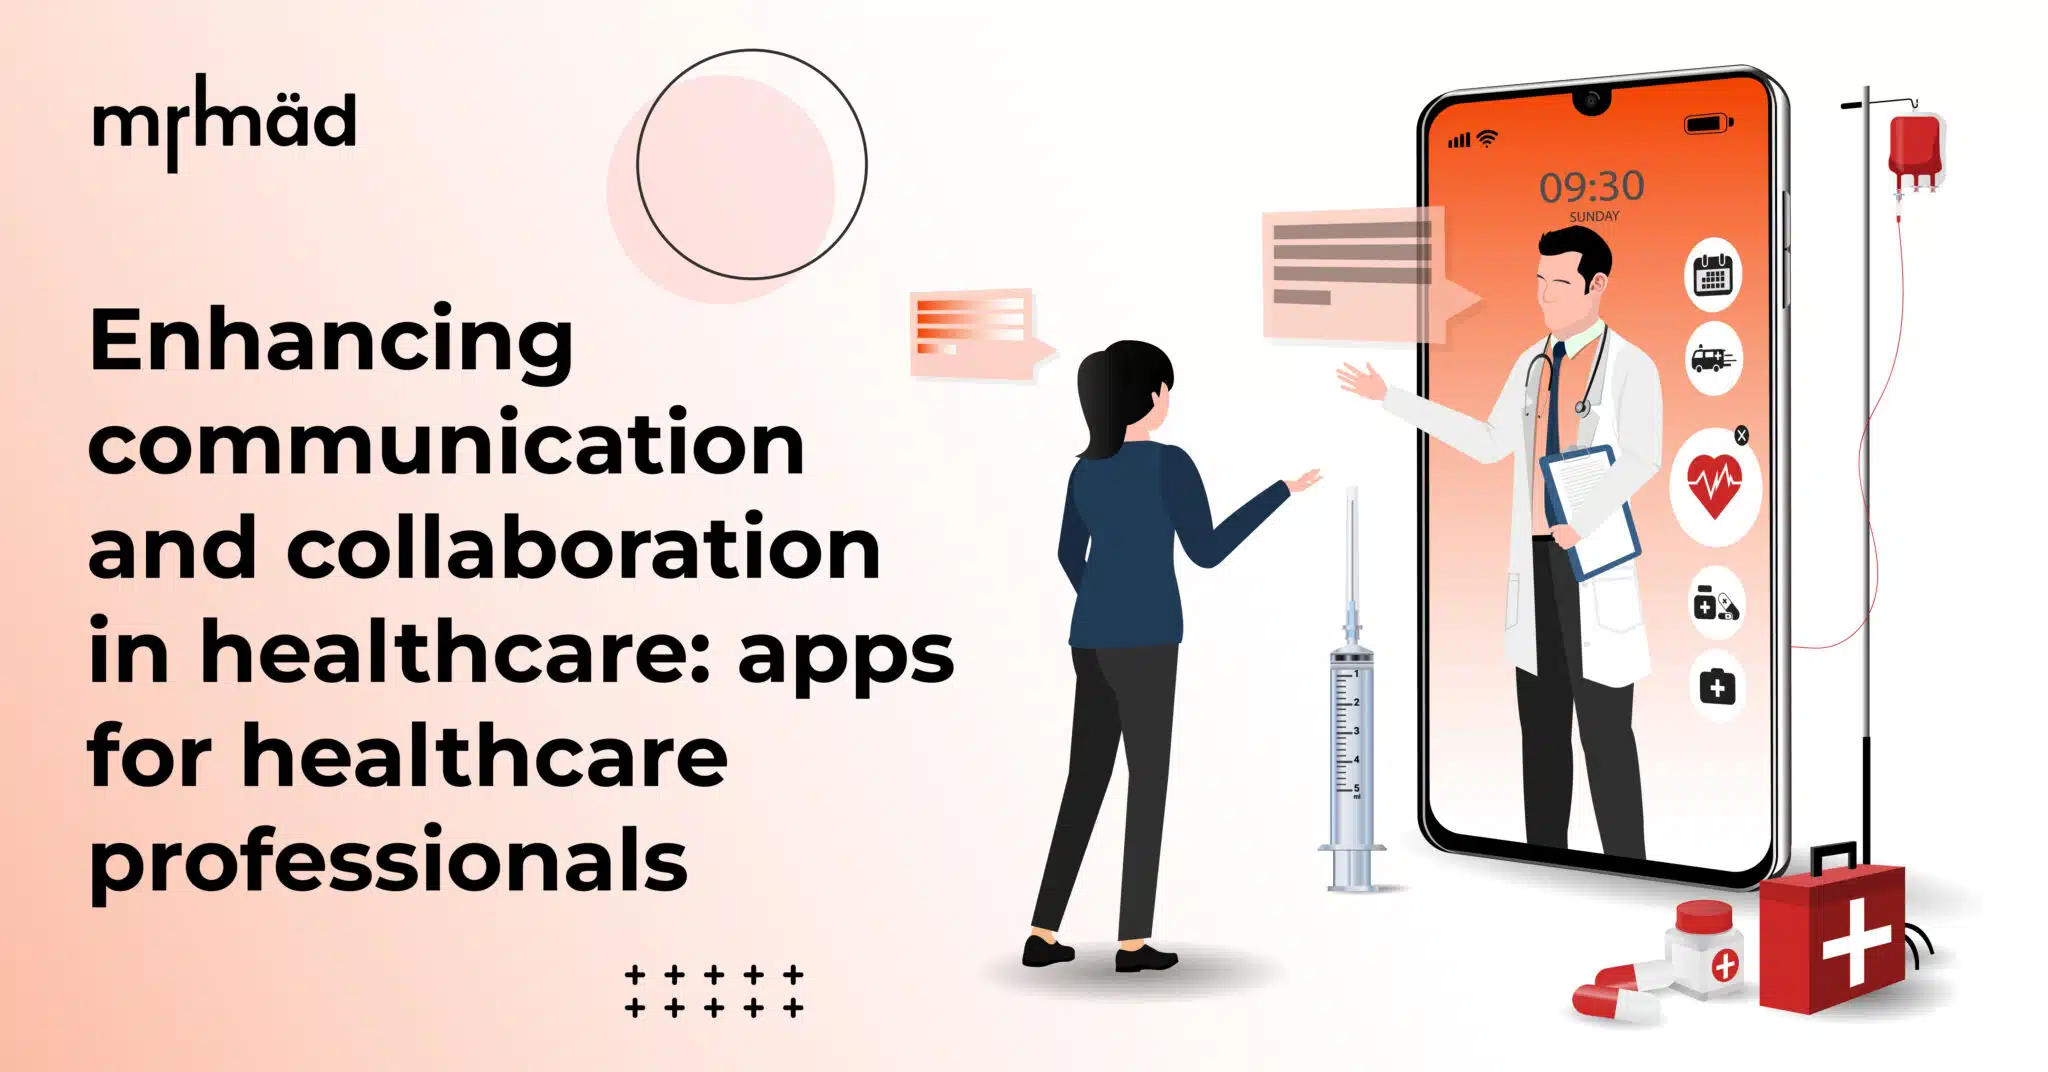 Enhancing communication and collaboration in healthcare: apps for healthcare professionals